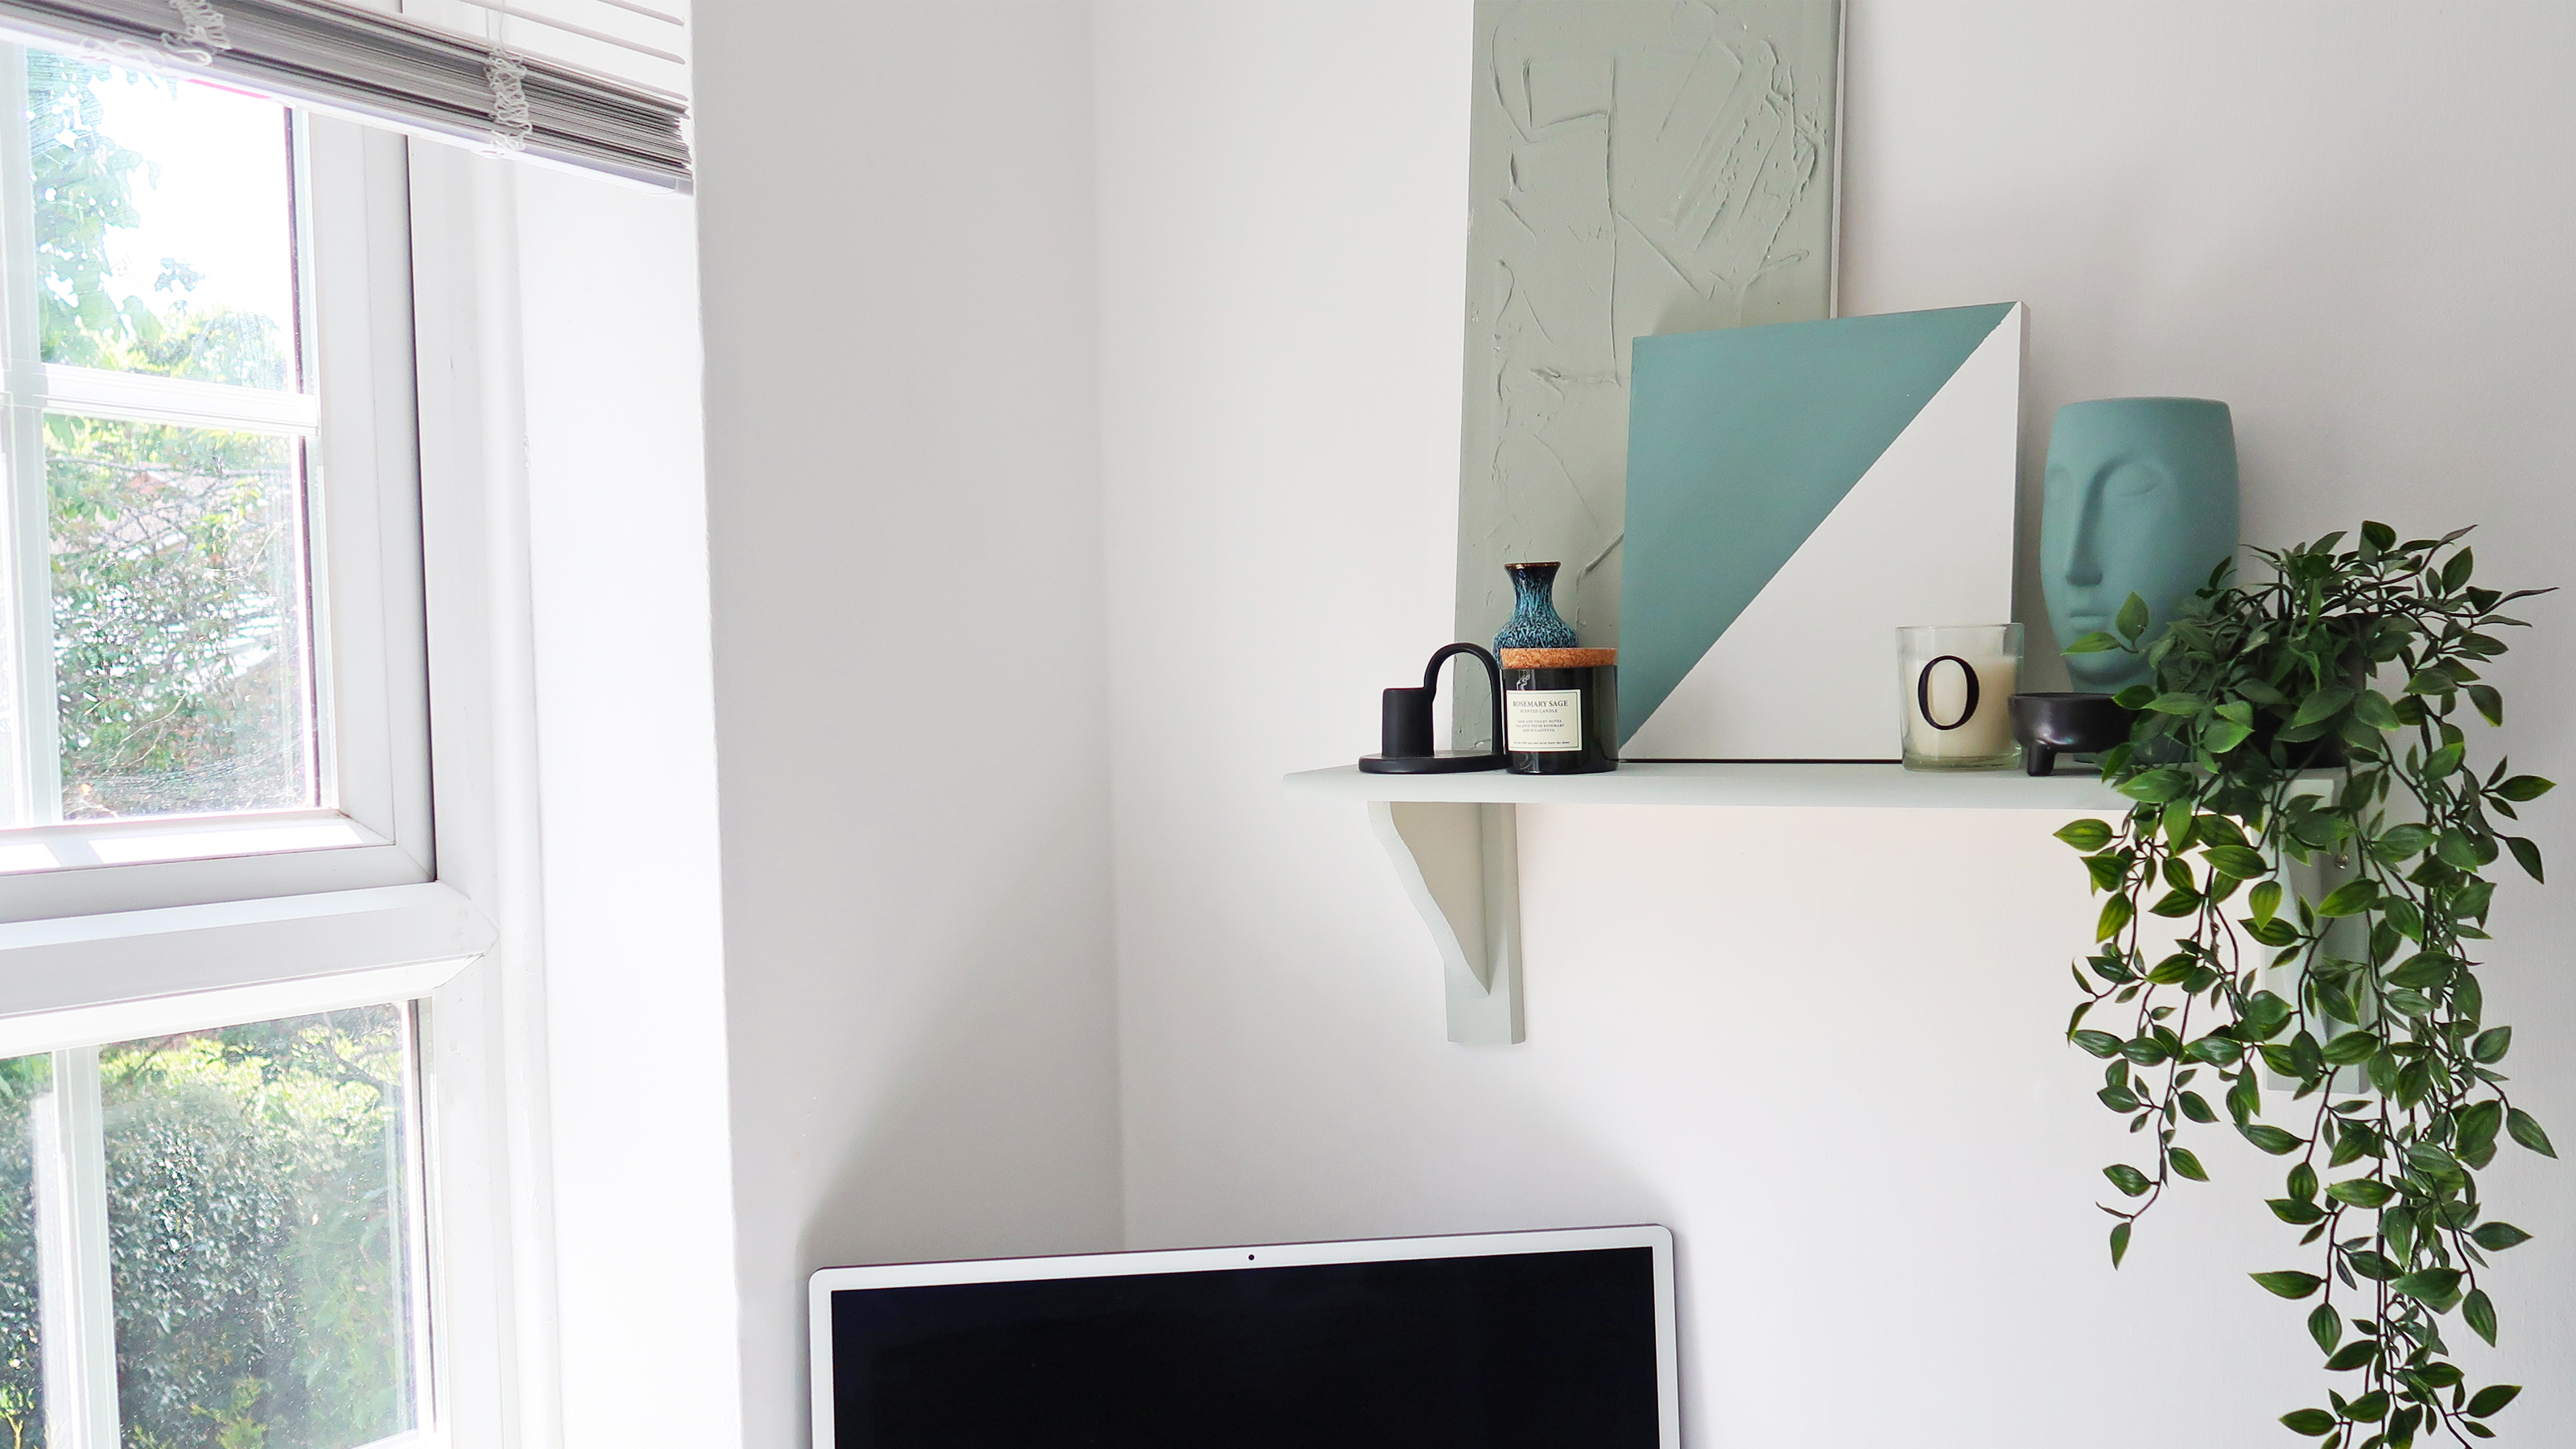 How to Hang Shelves on Your Wall Without Tools or Screws